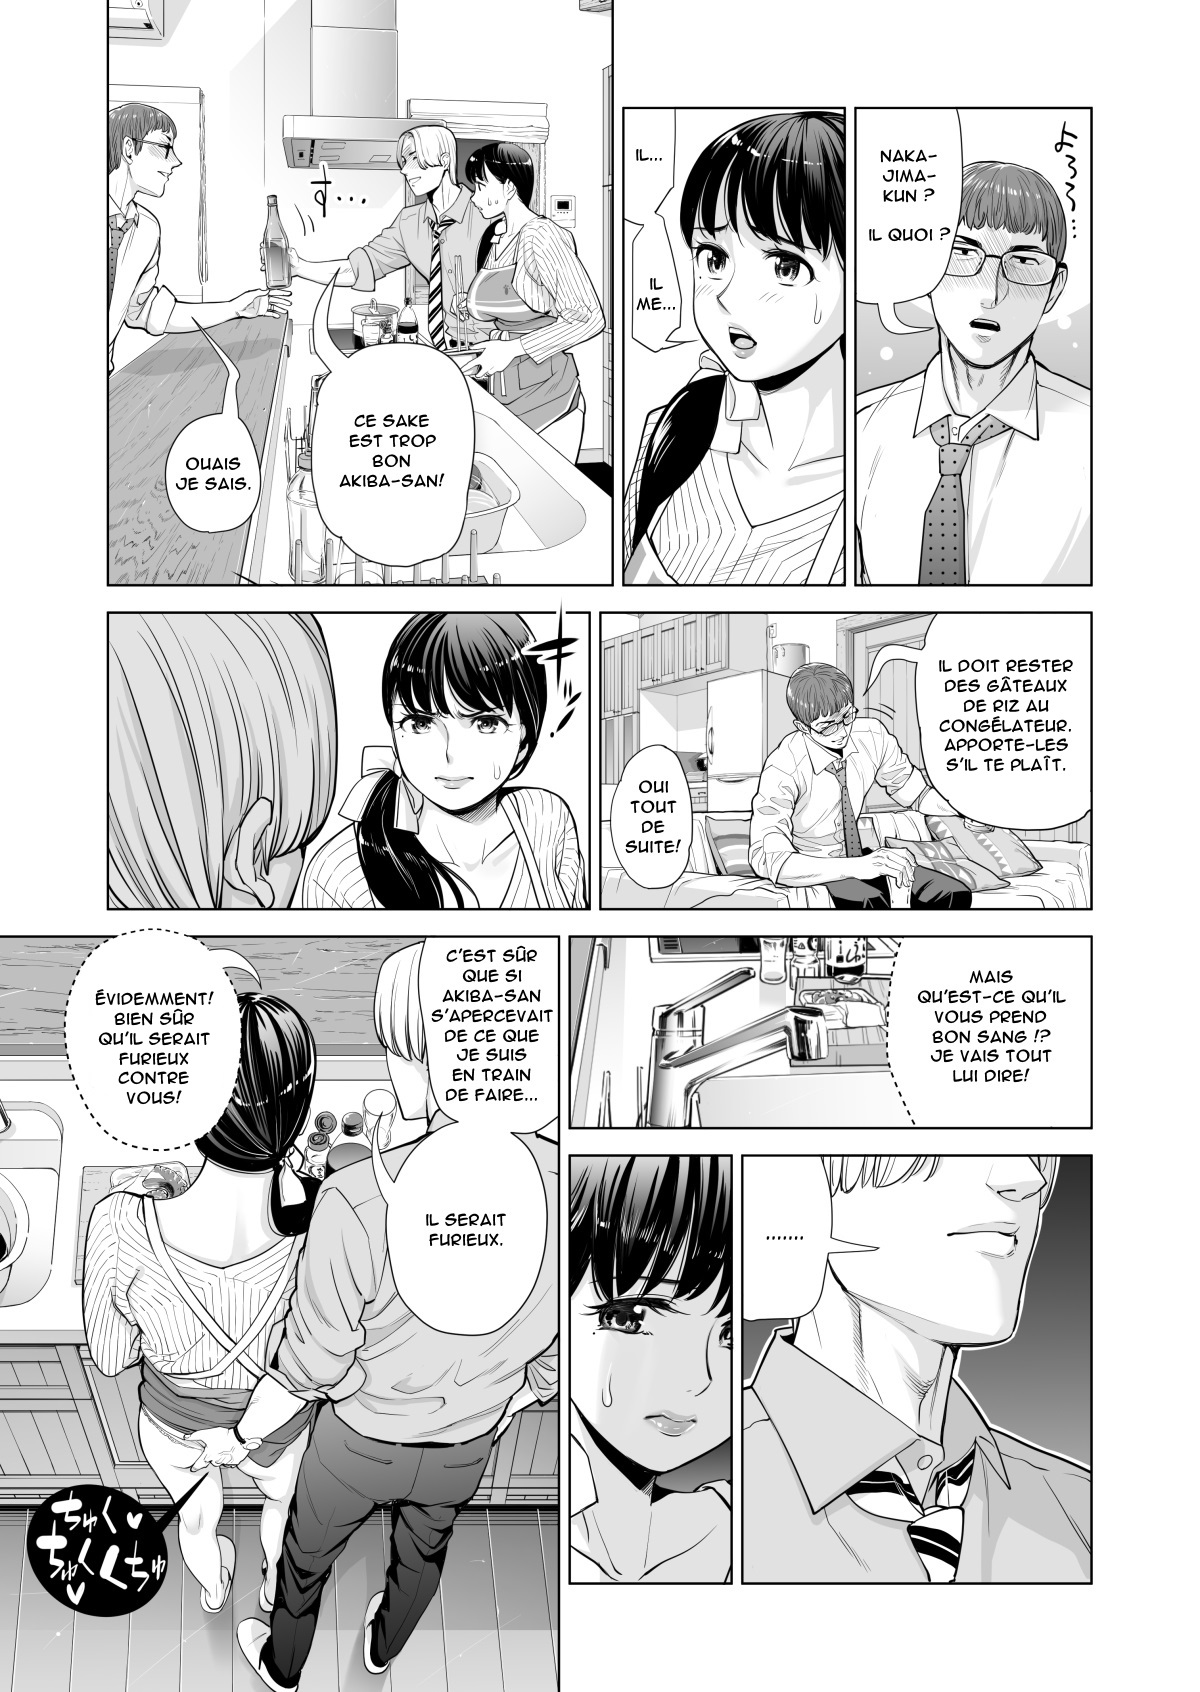 Tsukiyo no Midare Zake  Moonlit Intoxication ~ A Housewife Stolen by a Coworker Besides her Blackout Drunk Husband ~ Chapter 1 numero d'image 27